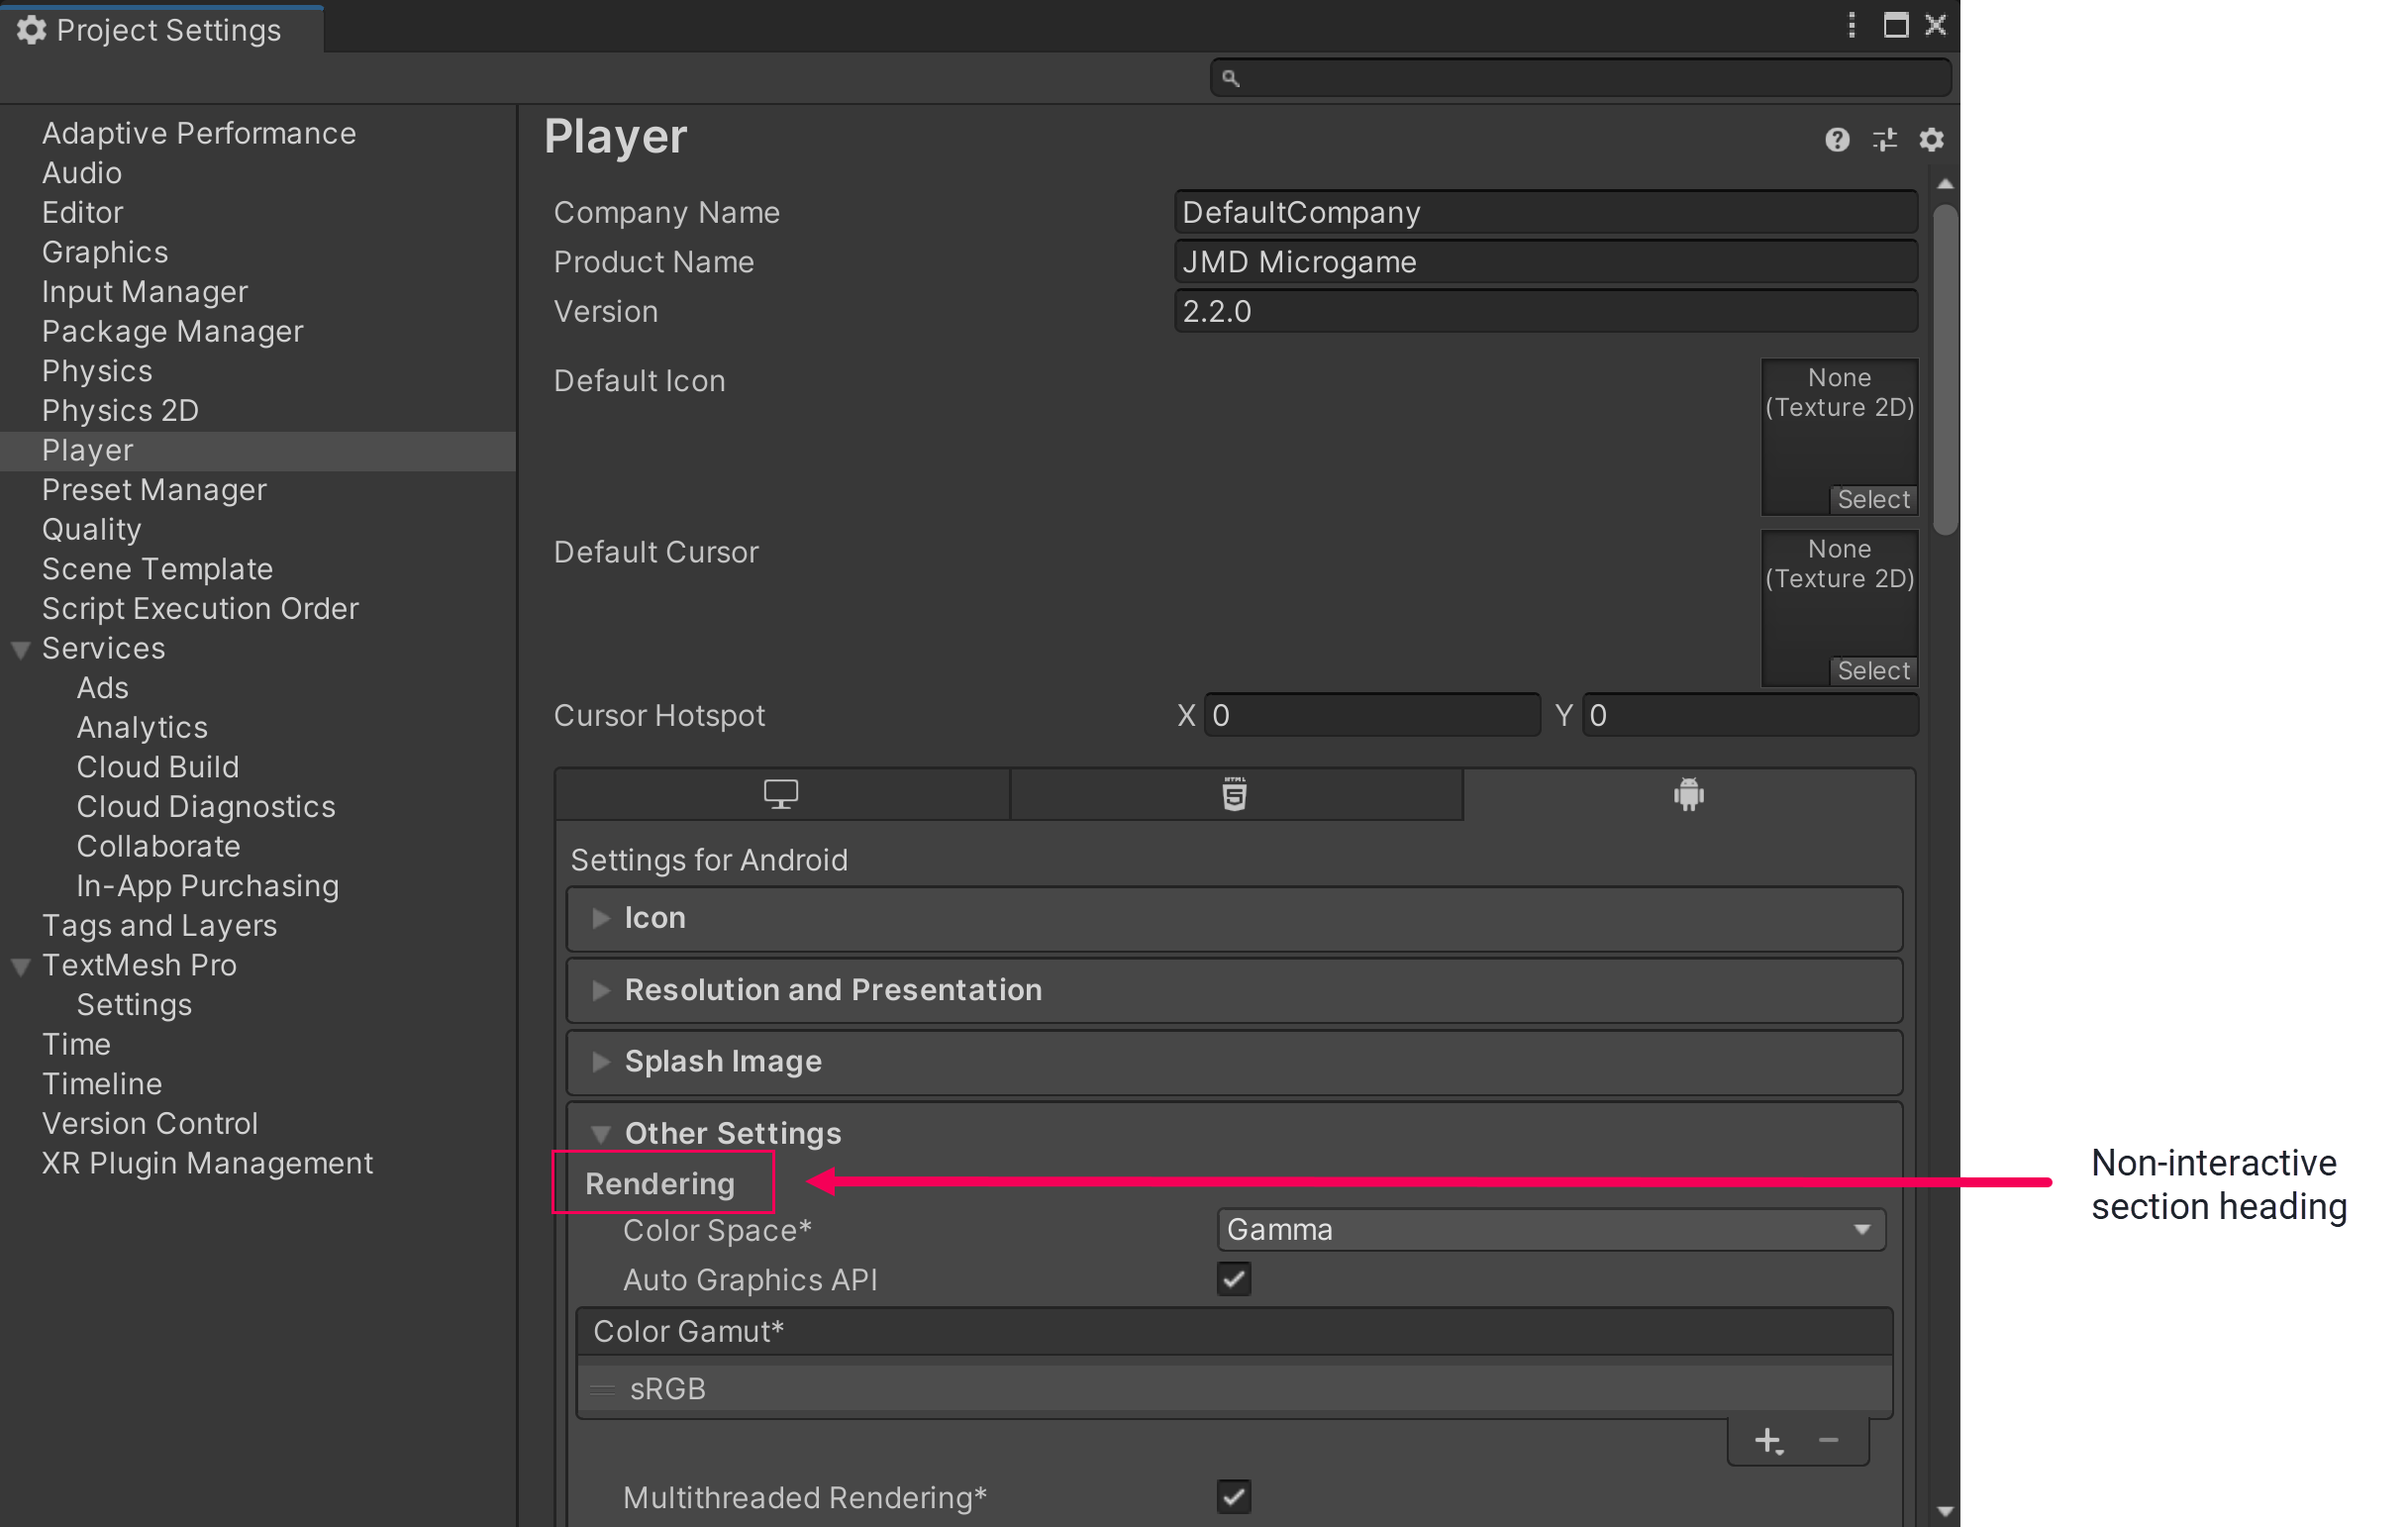 Example of a non-interactive section heading in the Project Settings window